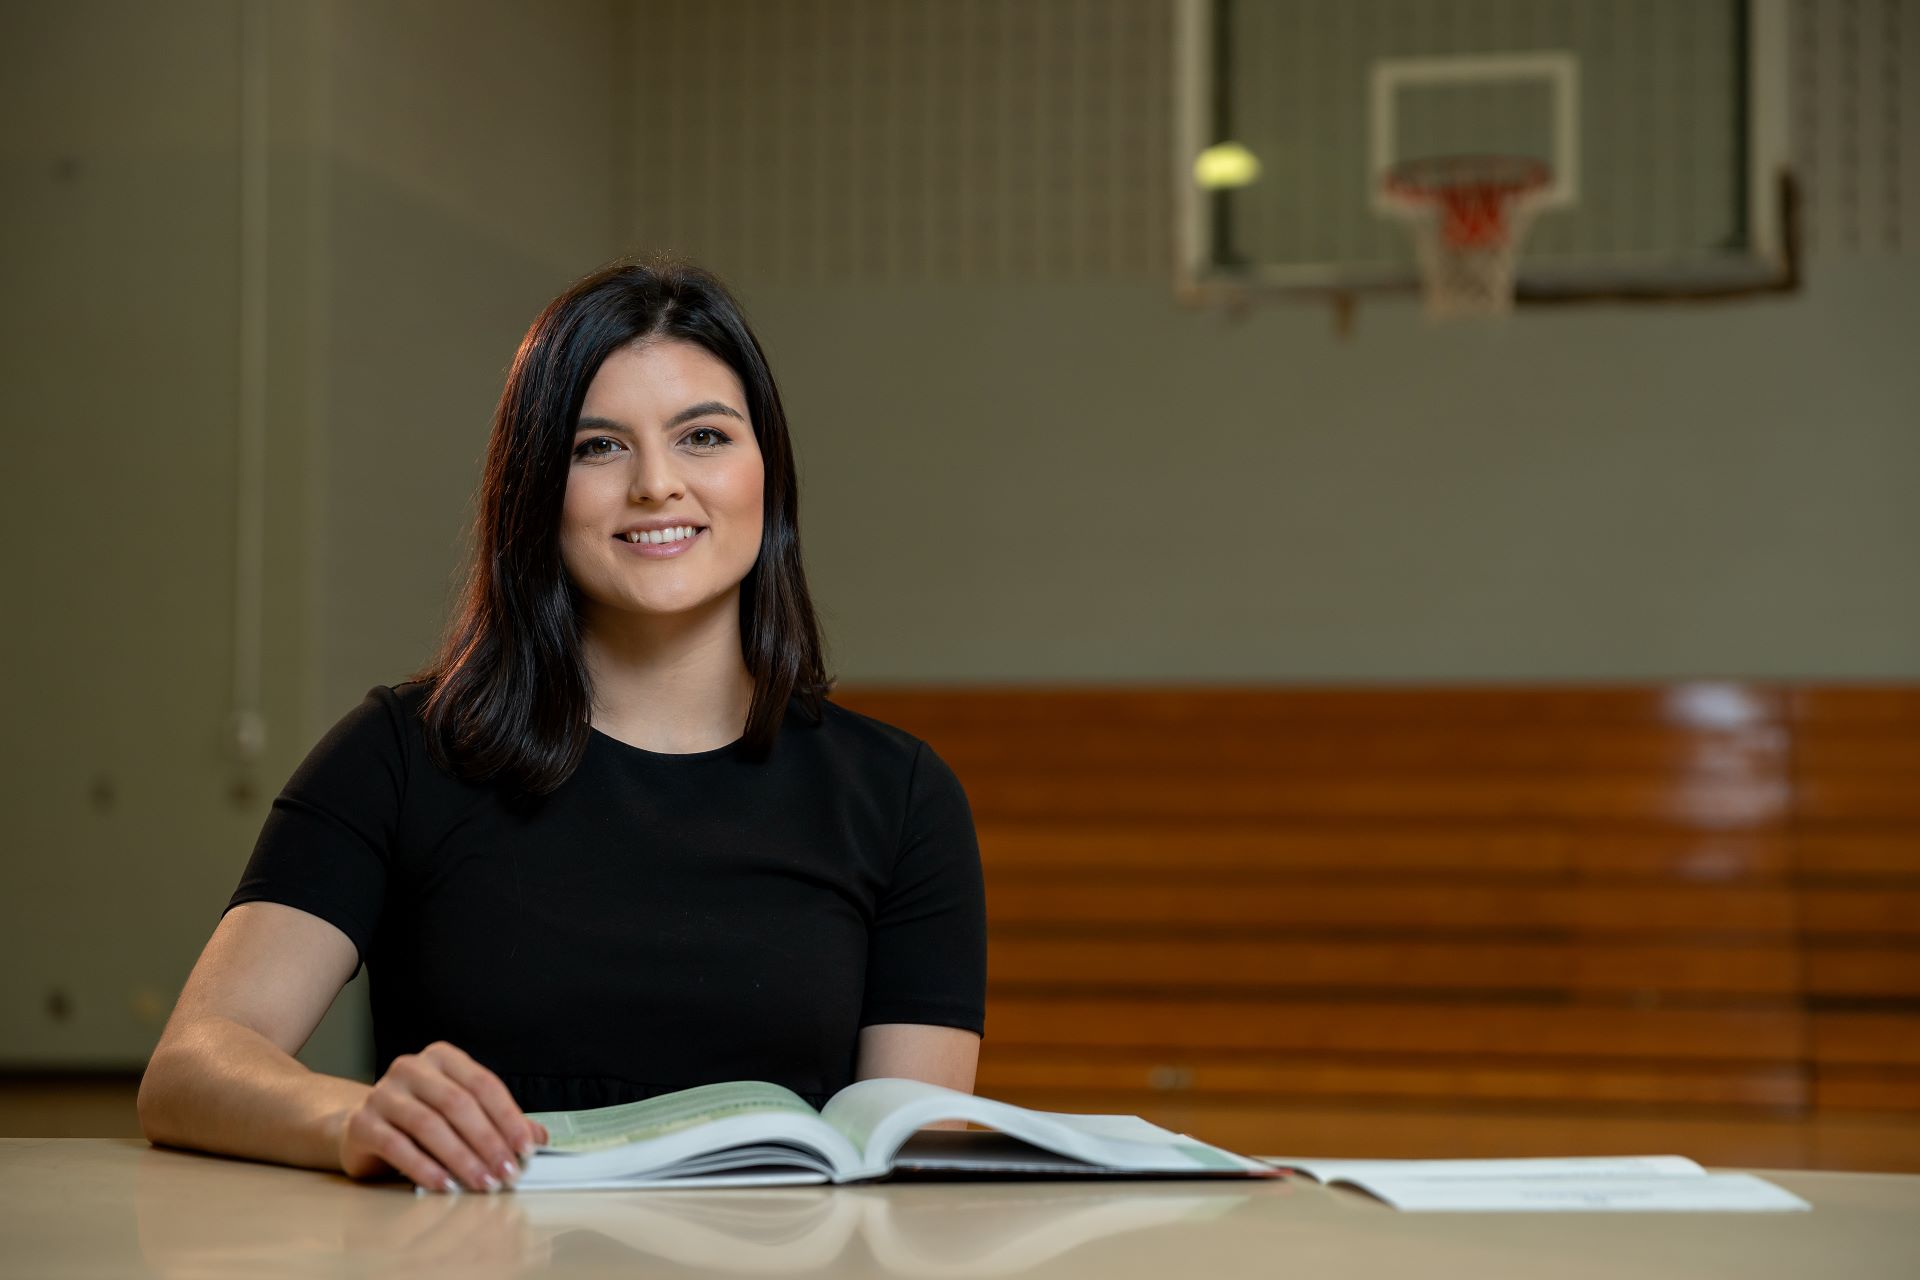 Female student smiling in front of basketball court